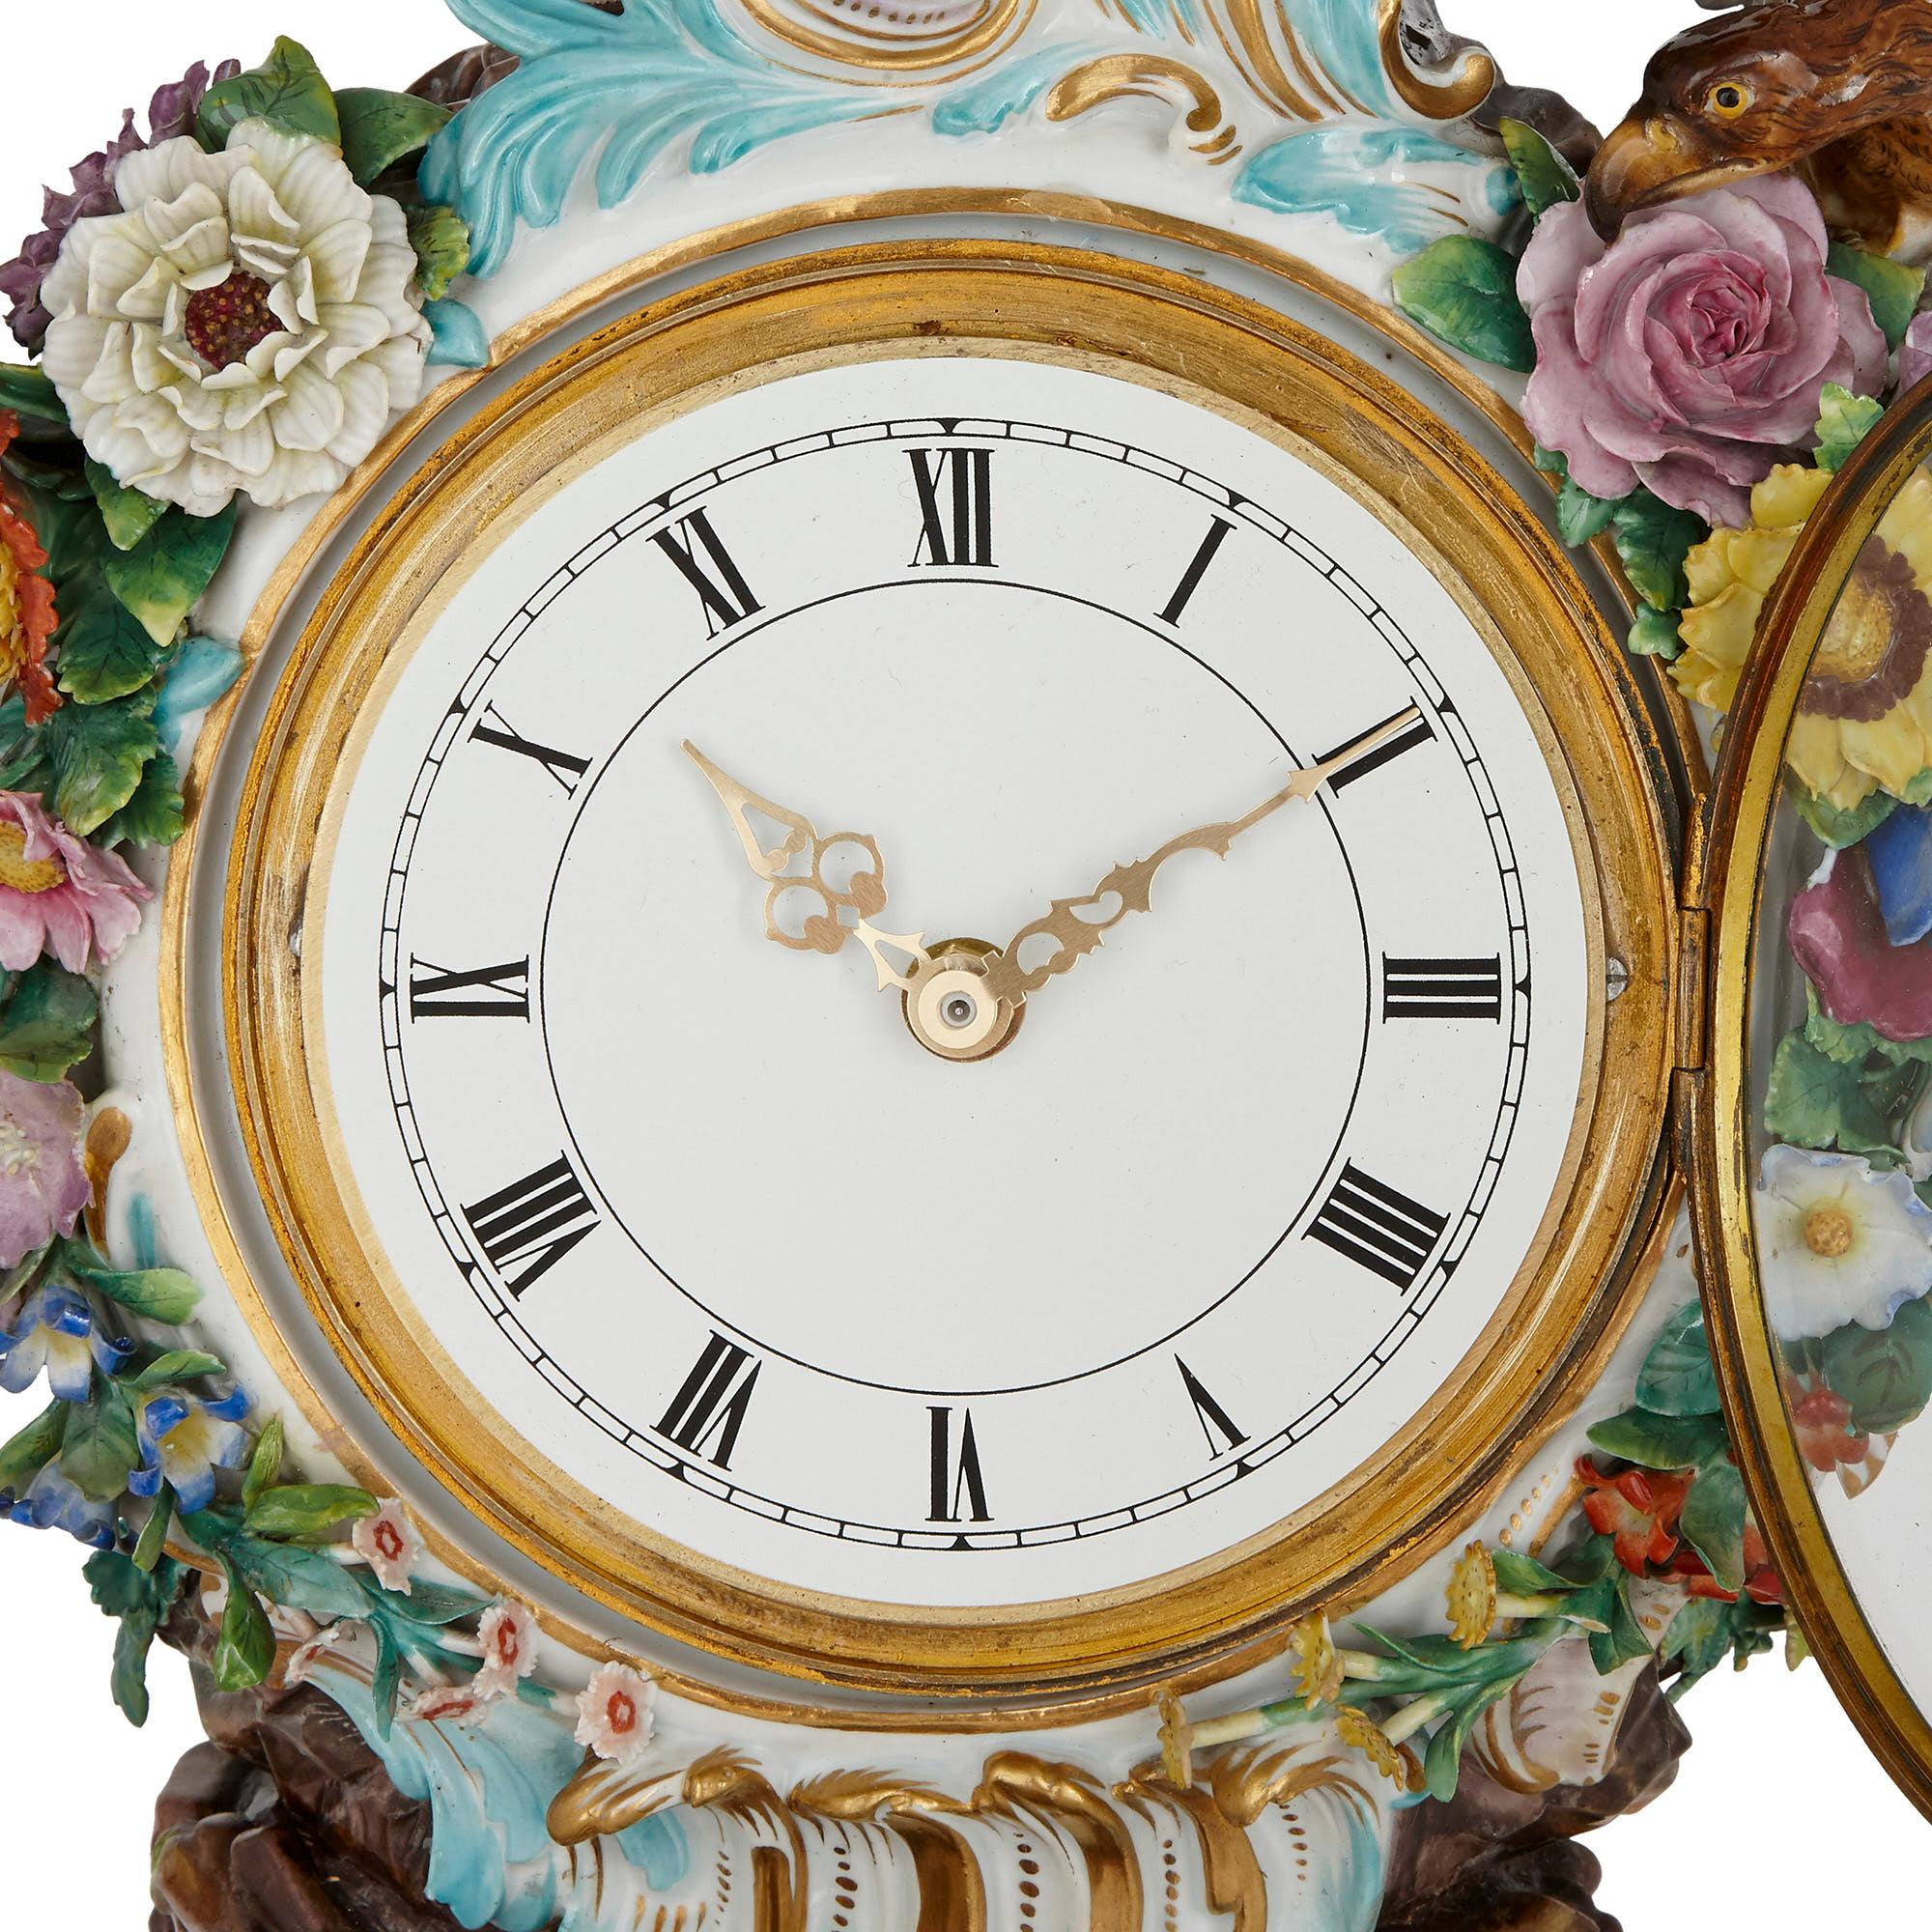 Large Rococo style porcelain mantel clock by Meissen
German, 19th century
Measures: Height 66cm, width 33cm, depth 25cm

This superb mantel clock is a truly wonderful example of Meissen Porcelain and of German Rococo style design. The clock is